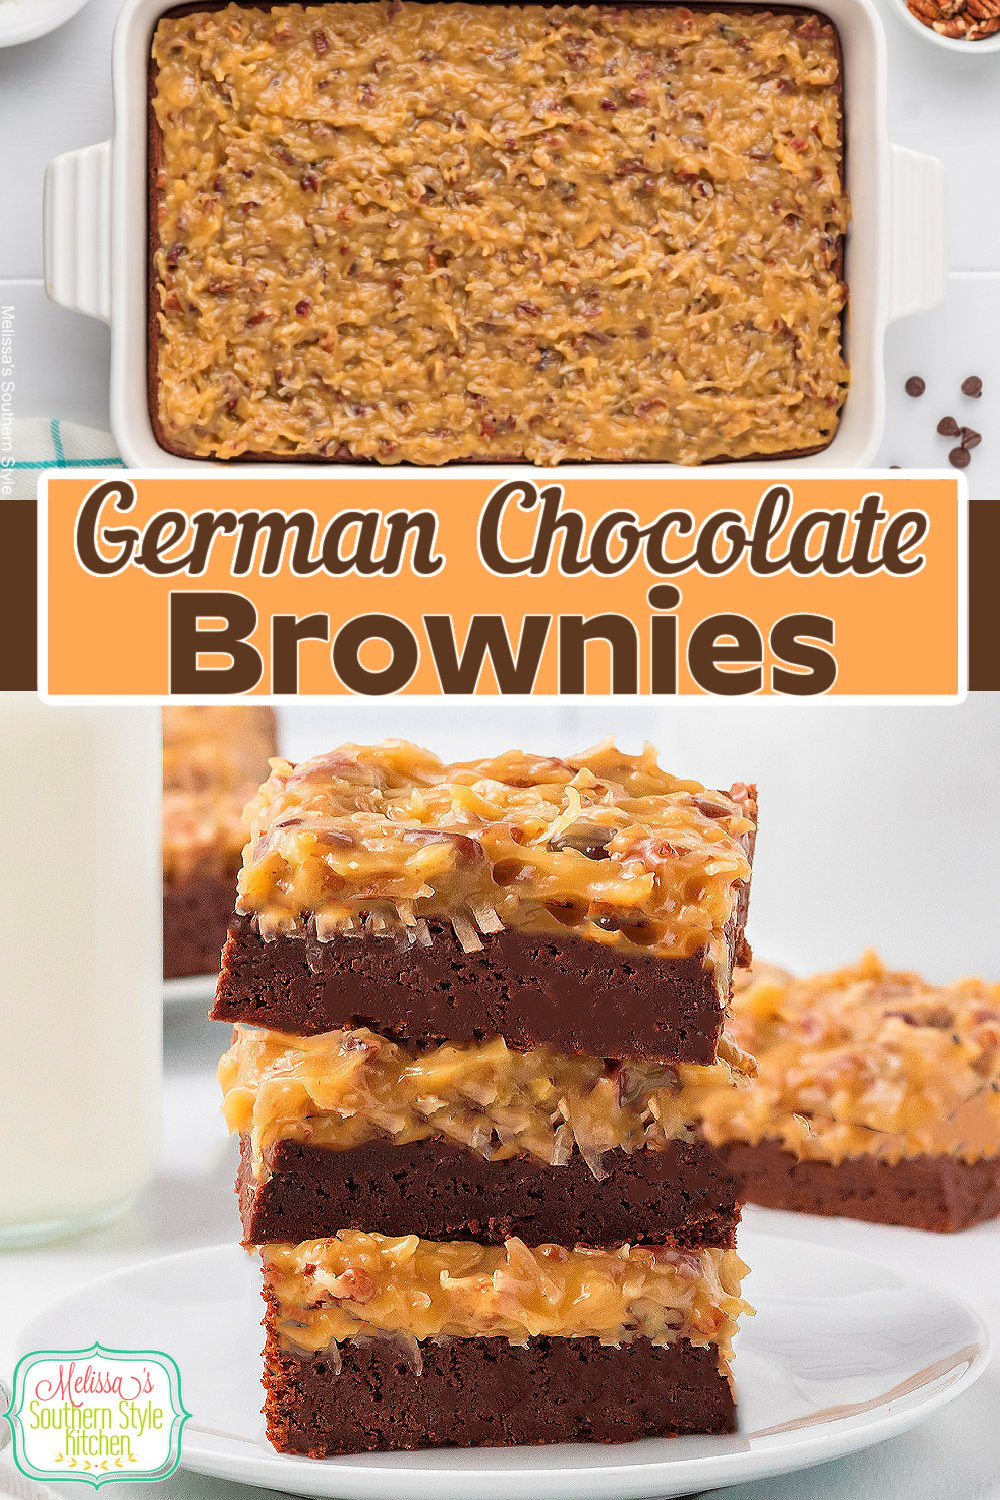 This German Chocolate Brownies recipe is the only one you'll ever need! They're rich and fudgy making them the ultimate handheld dessert #germanchocolatecake #brownies #germanchocolatebrownies #germanchocolate #easybrownies #browniesrecipes #homemadebrownies #germanchocolatefrosting via @melissasssk